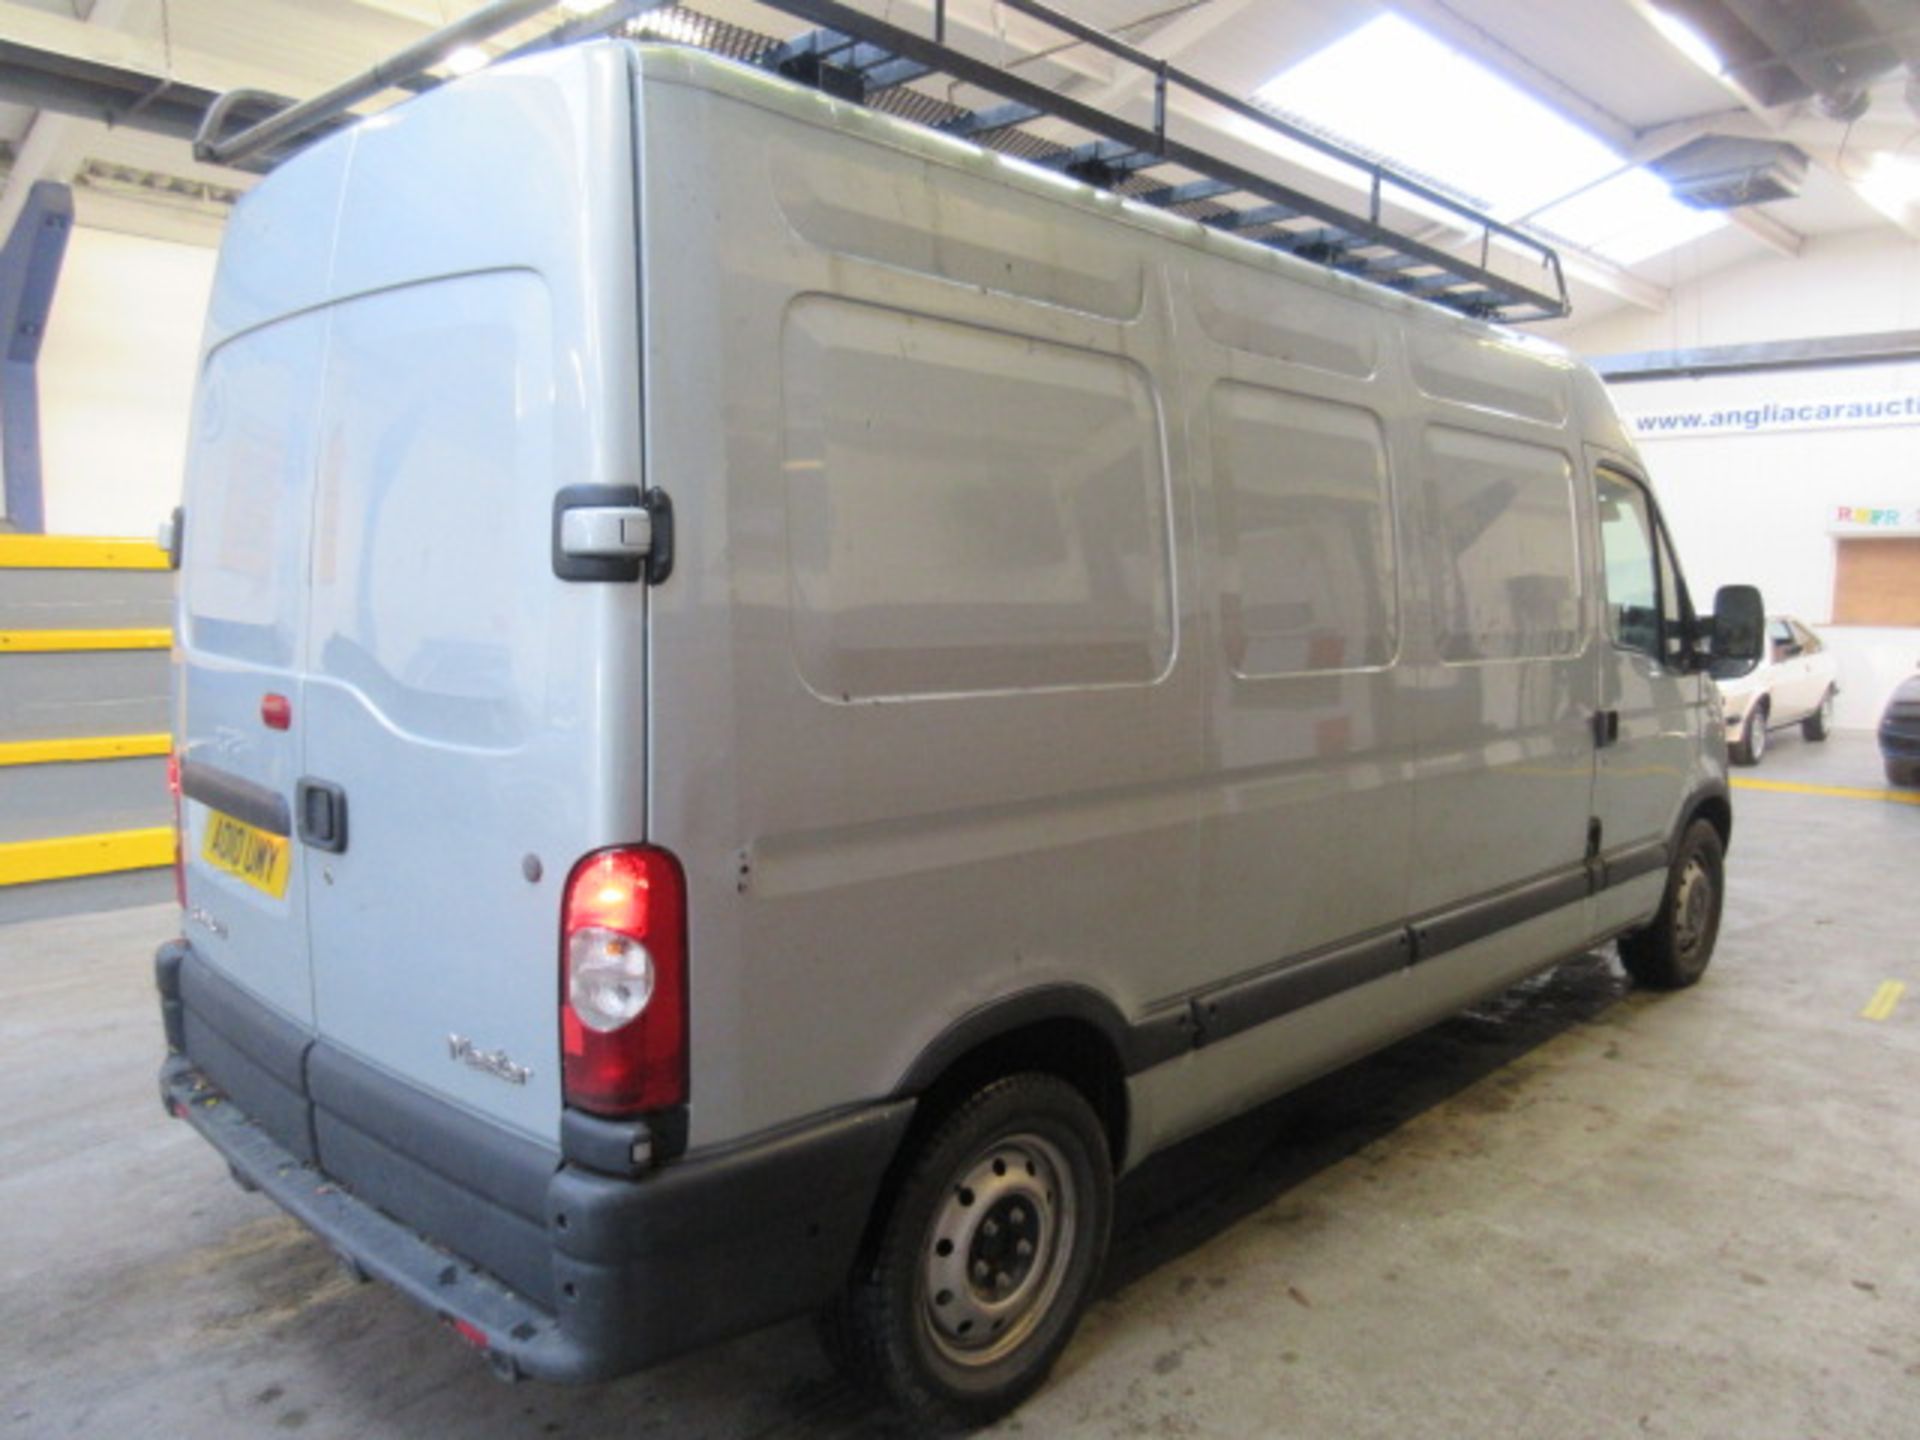 10 10 Renault Master LM35 Extra DCI - Image 3 of 17